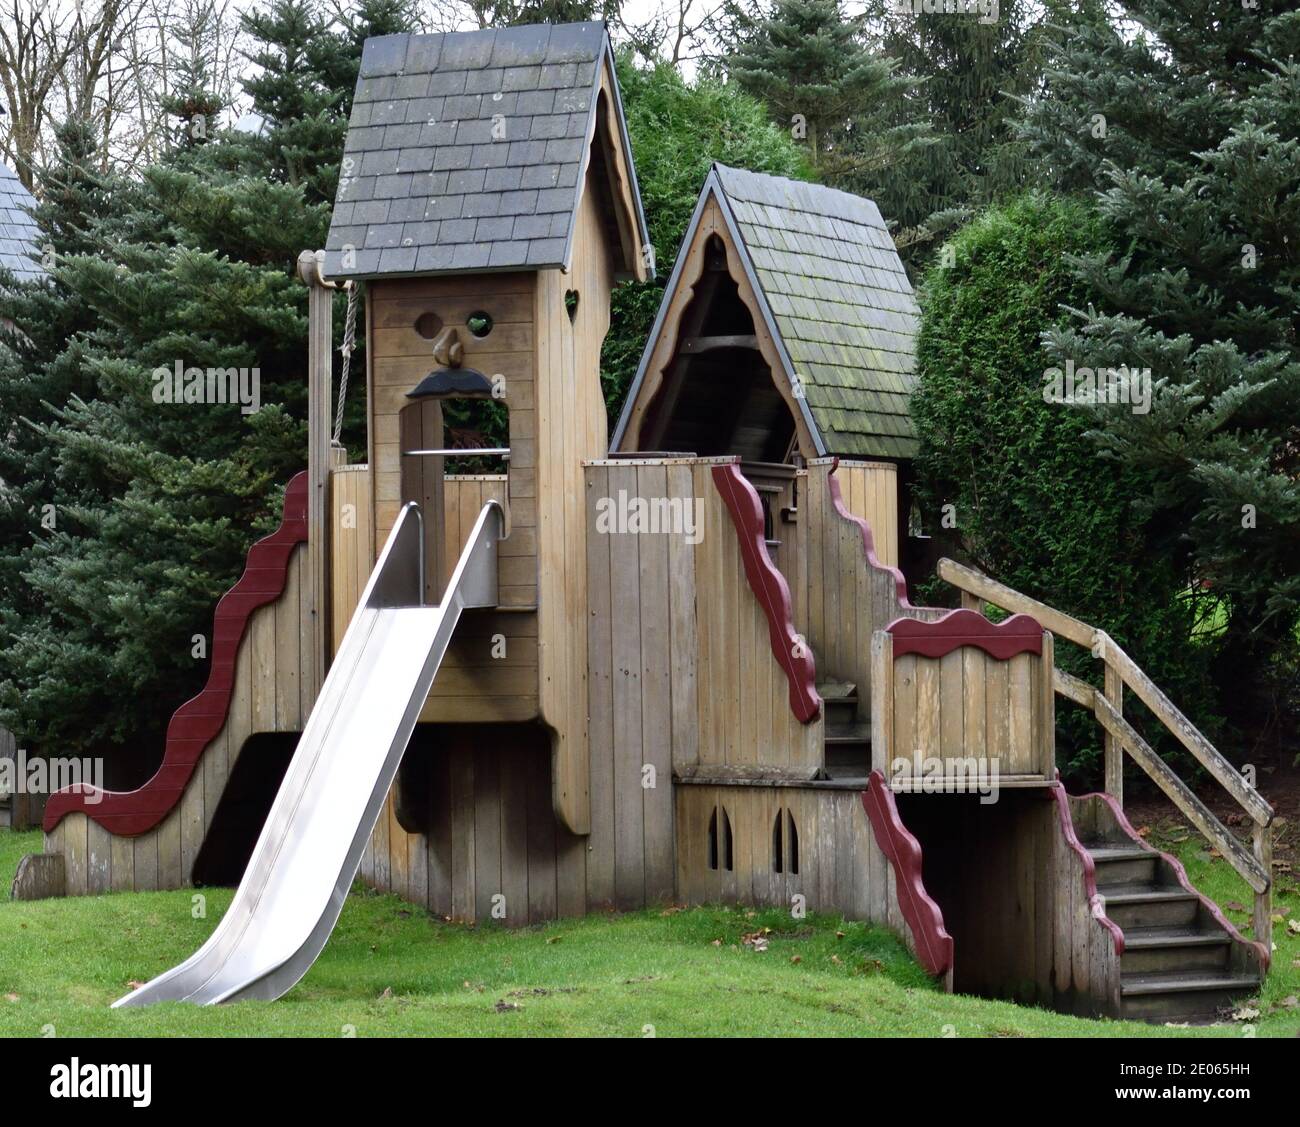 Wooden play castle in a woodland setting Stock Photo